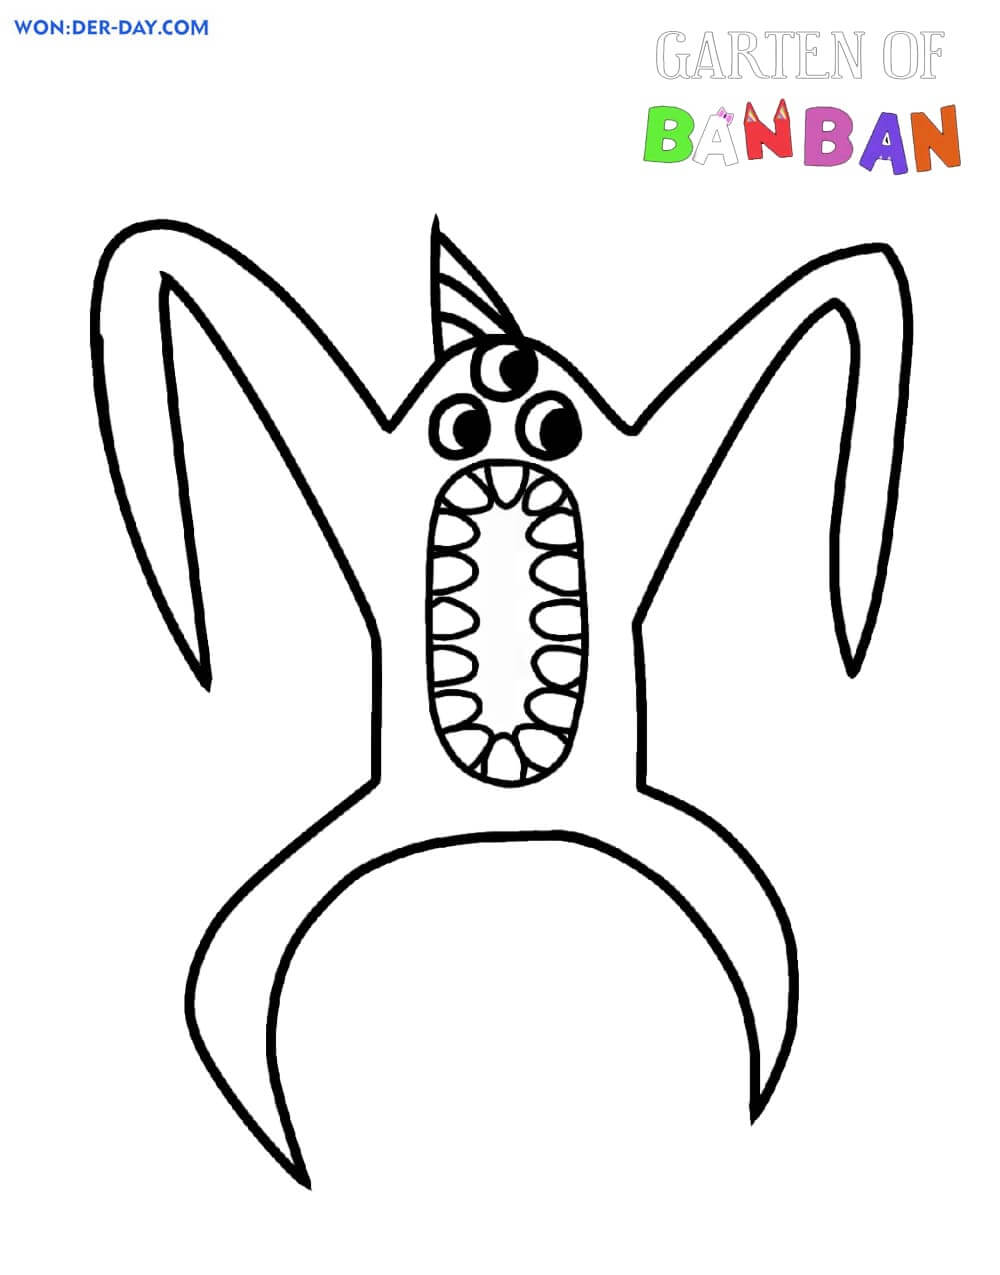 Garten of ban ban 2 - Coloring Pages Print Friendly for Kids